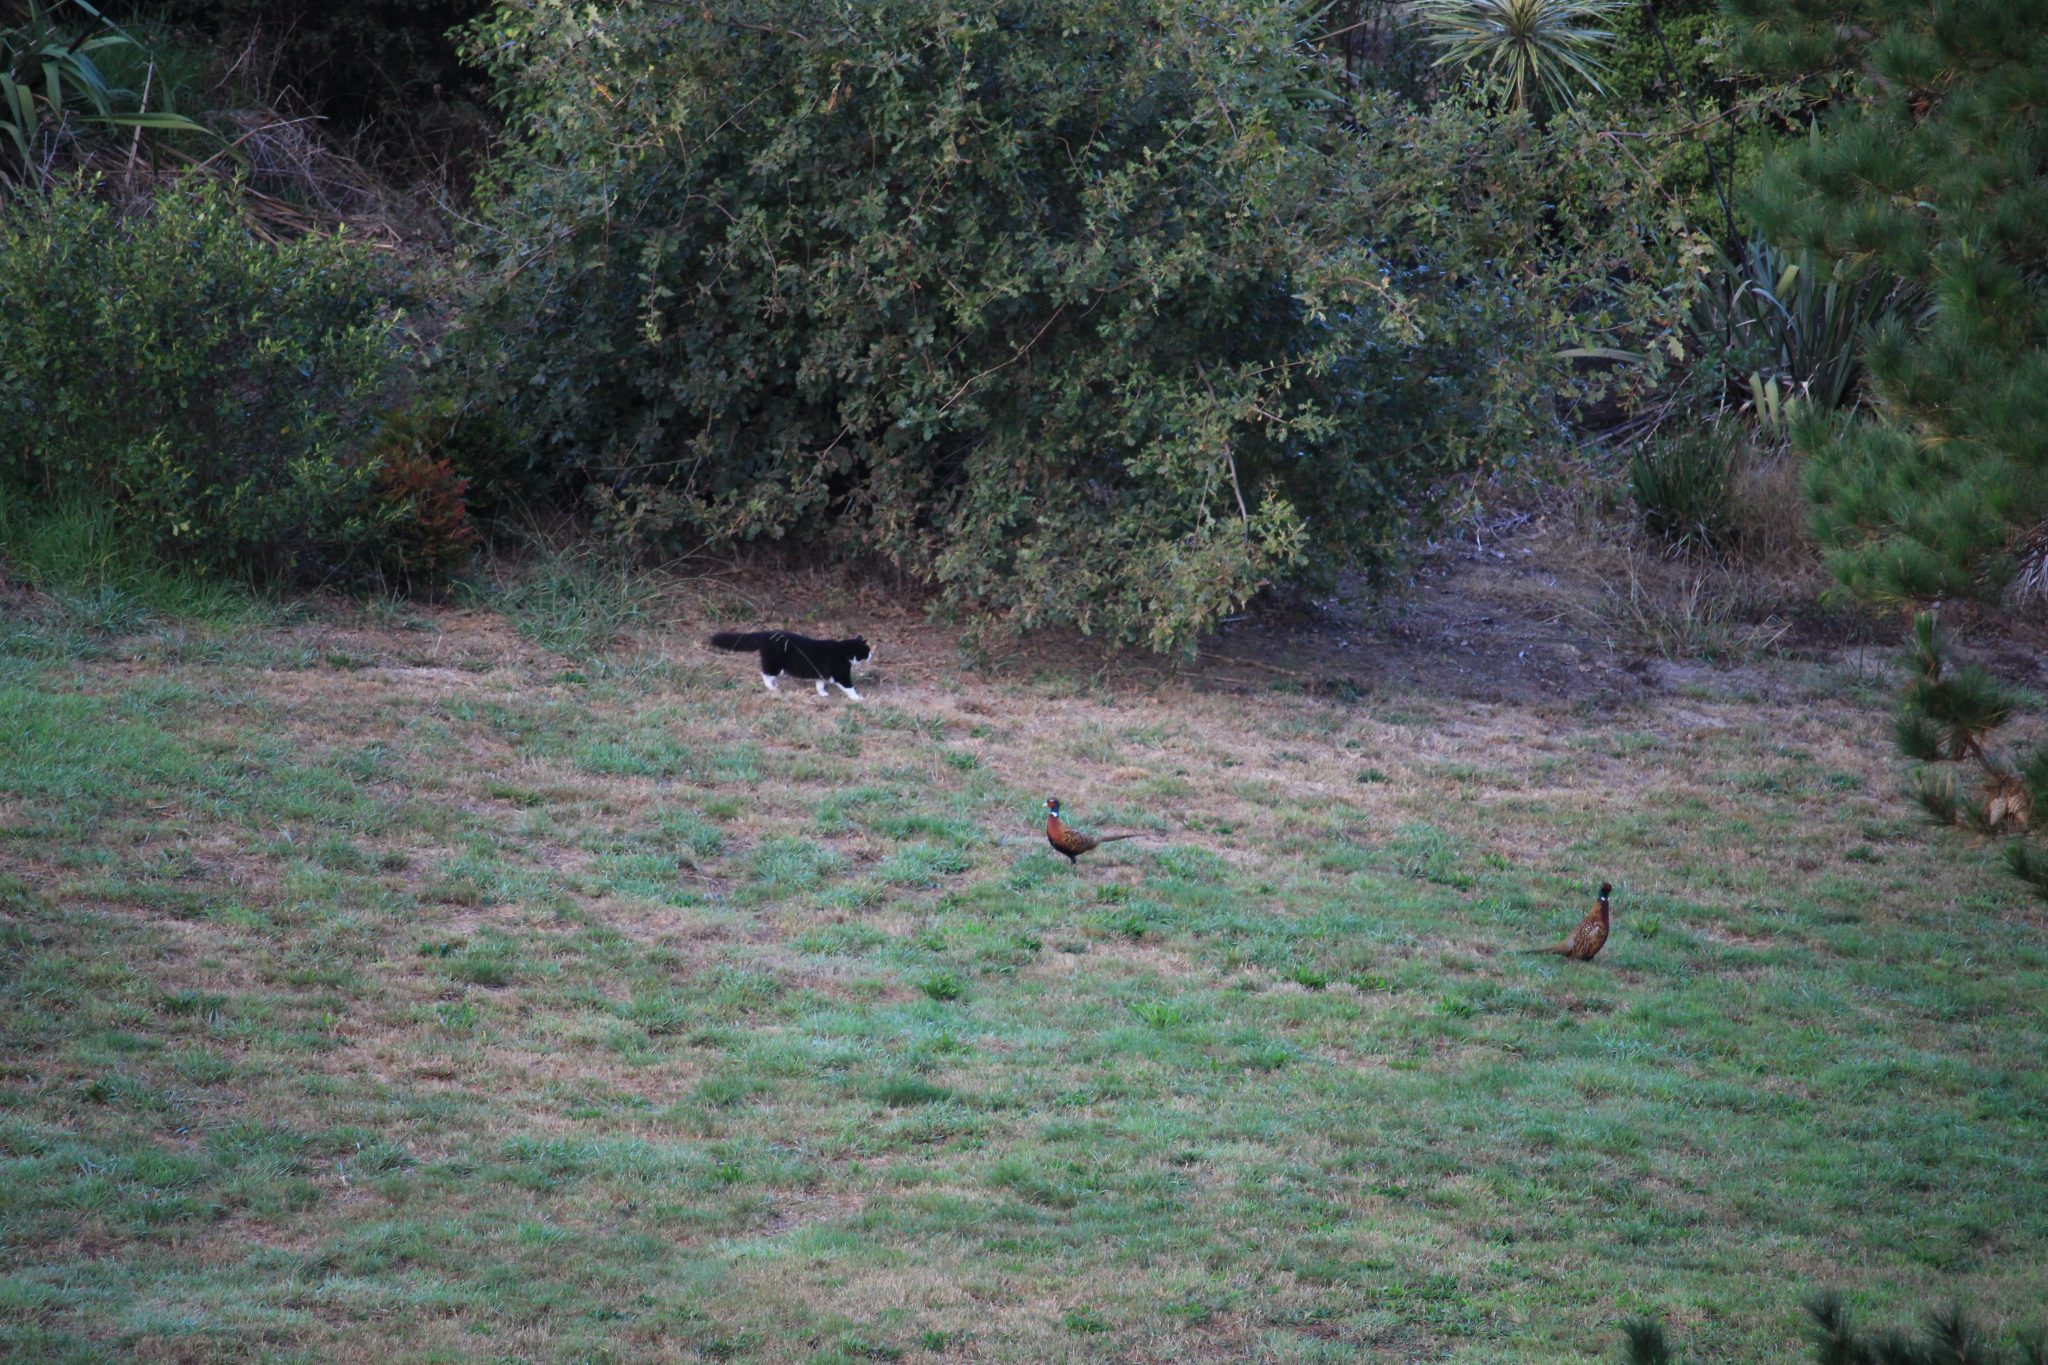 A fluffy tomcat sneaking across the grass towards two phesants.